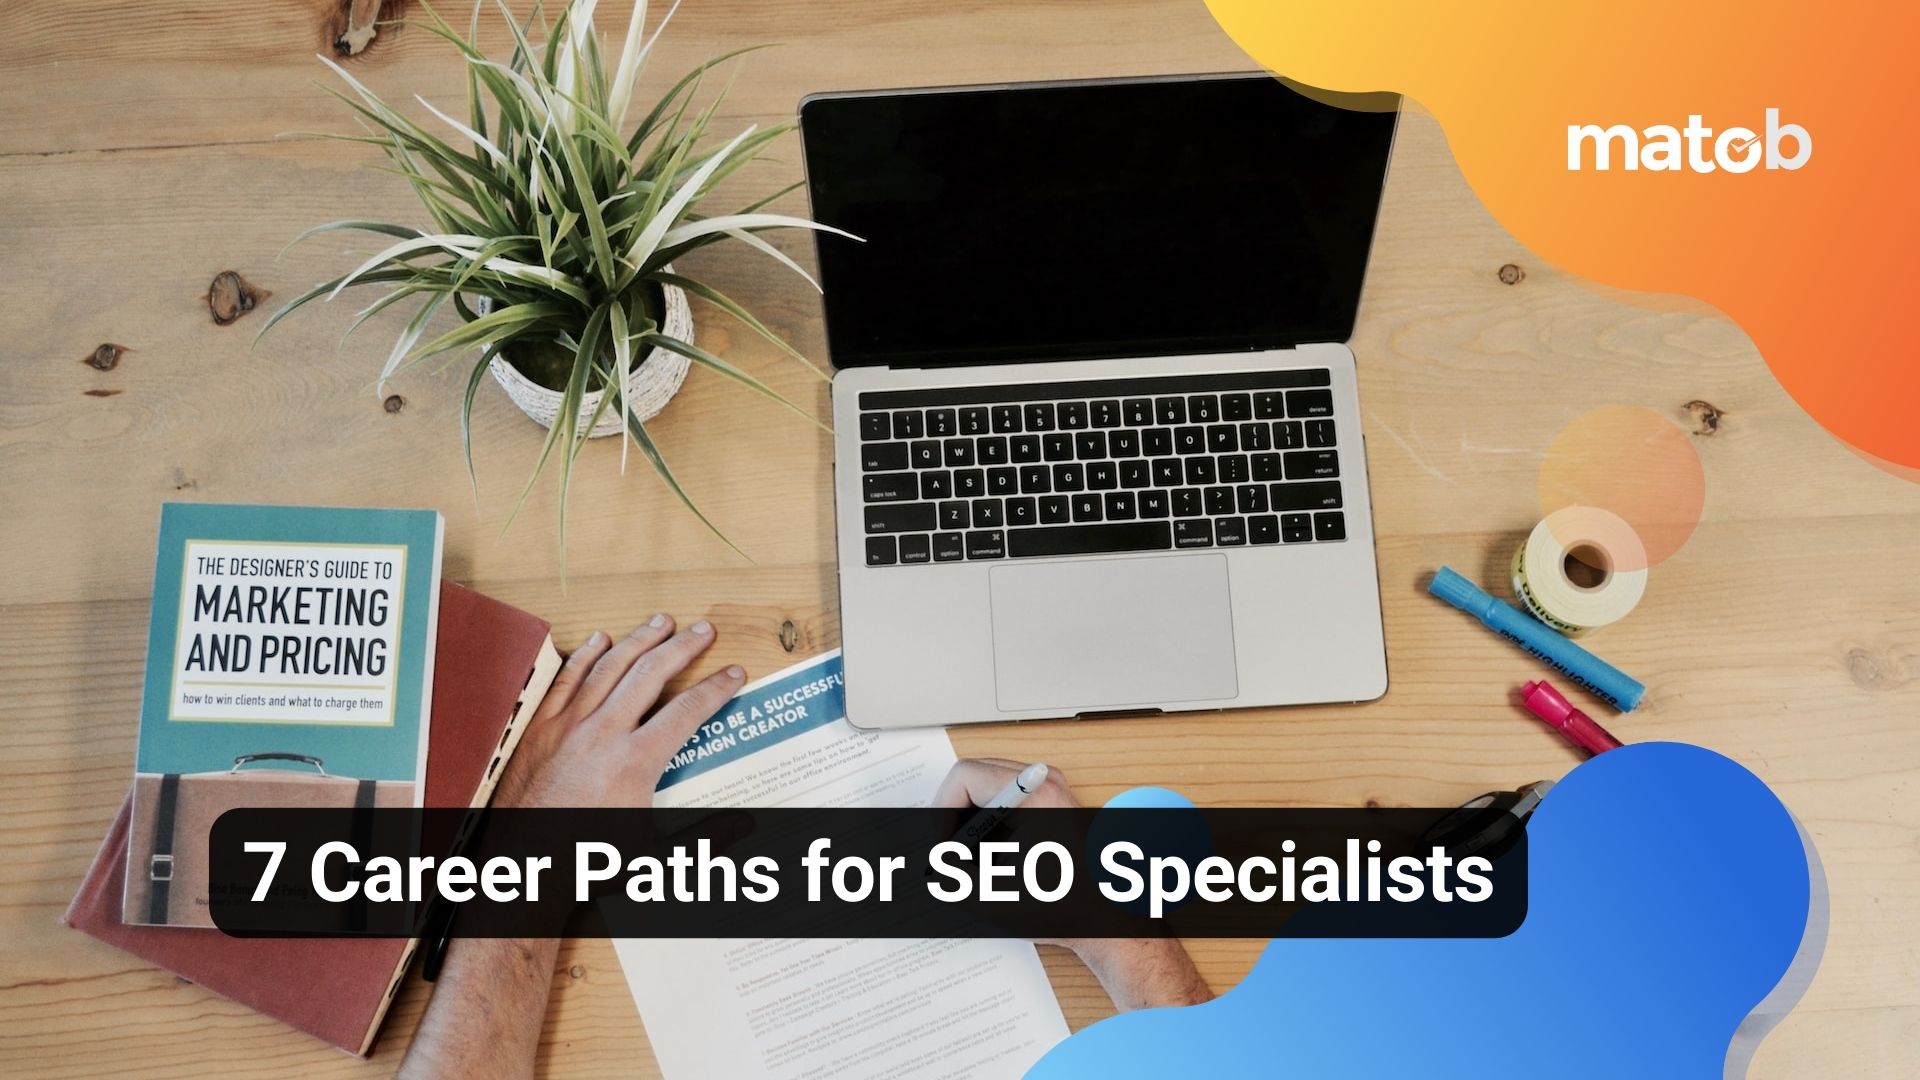 7 Career Paths for SEO Specialists